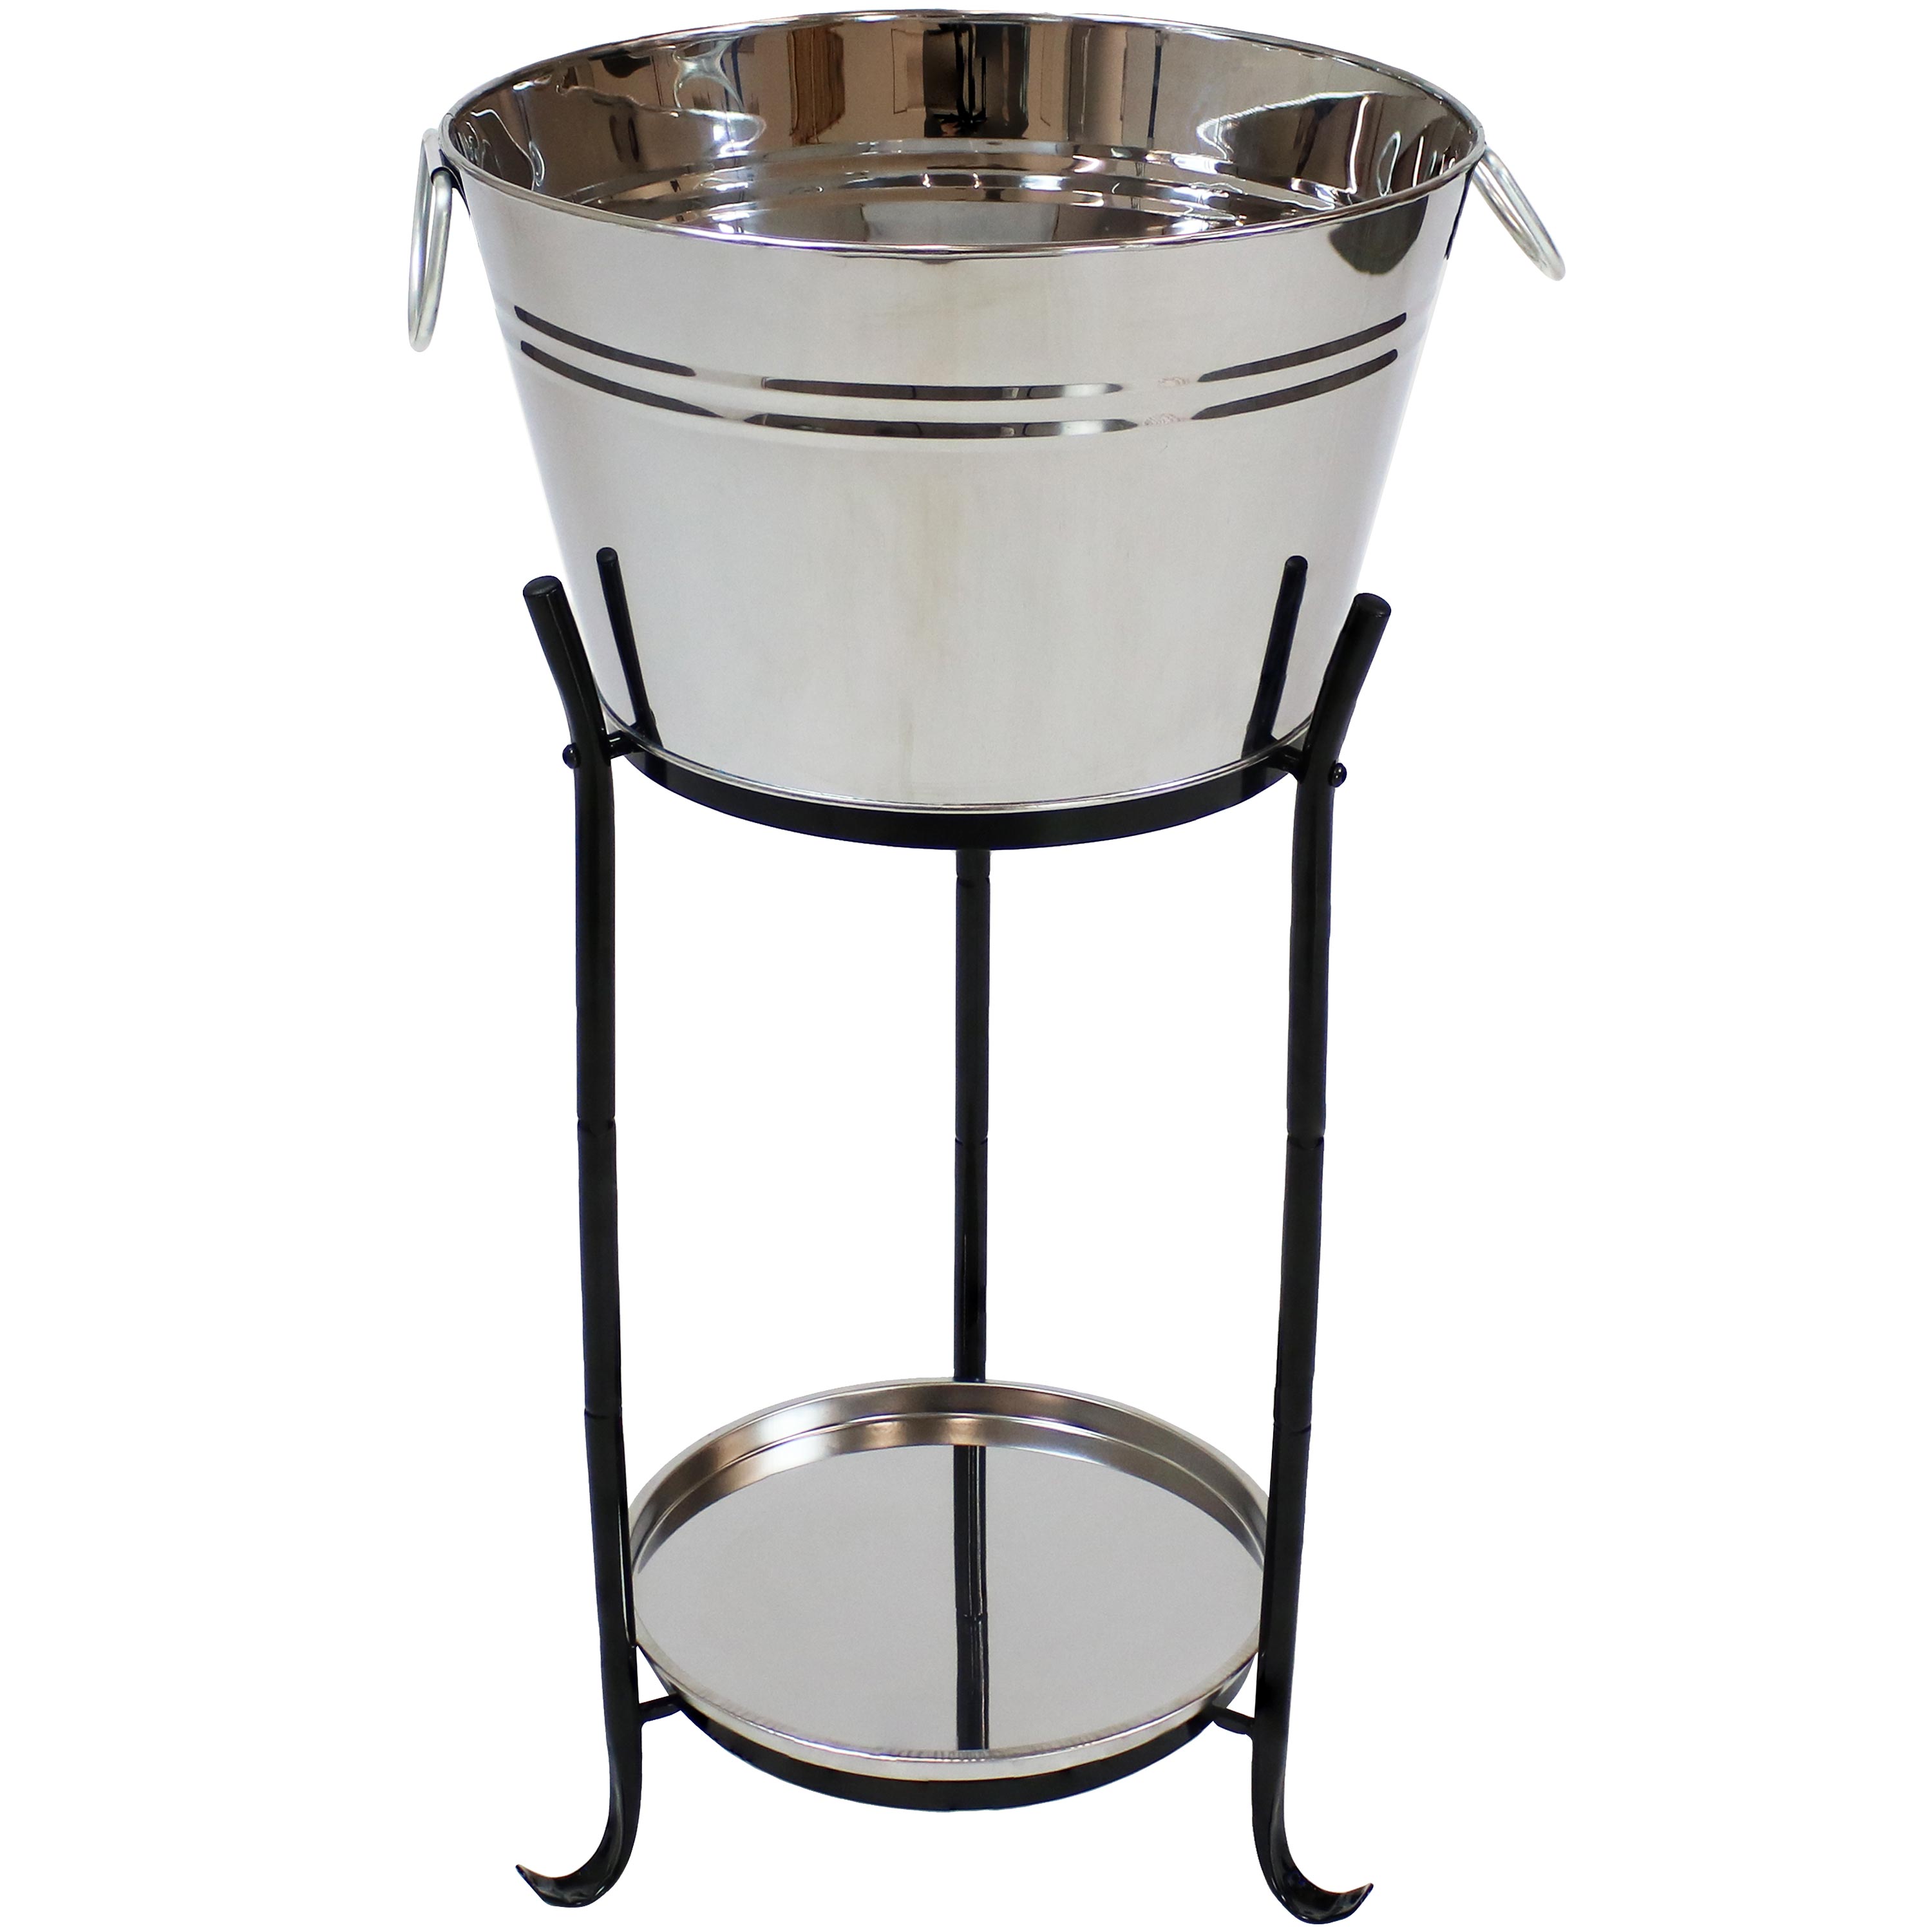 Sunnydaze Stainless Steel Ice Bucket Drink Cooler with Stand - image 1 of 11